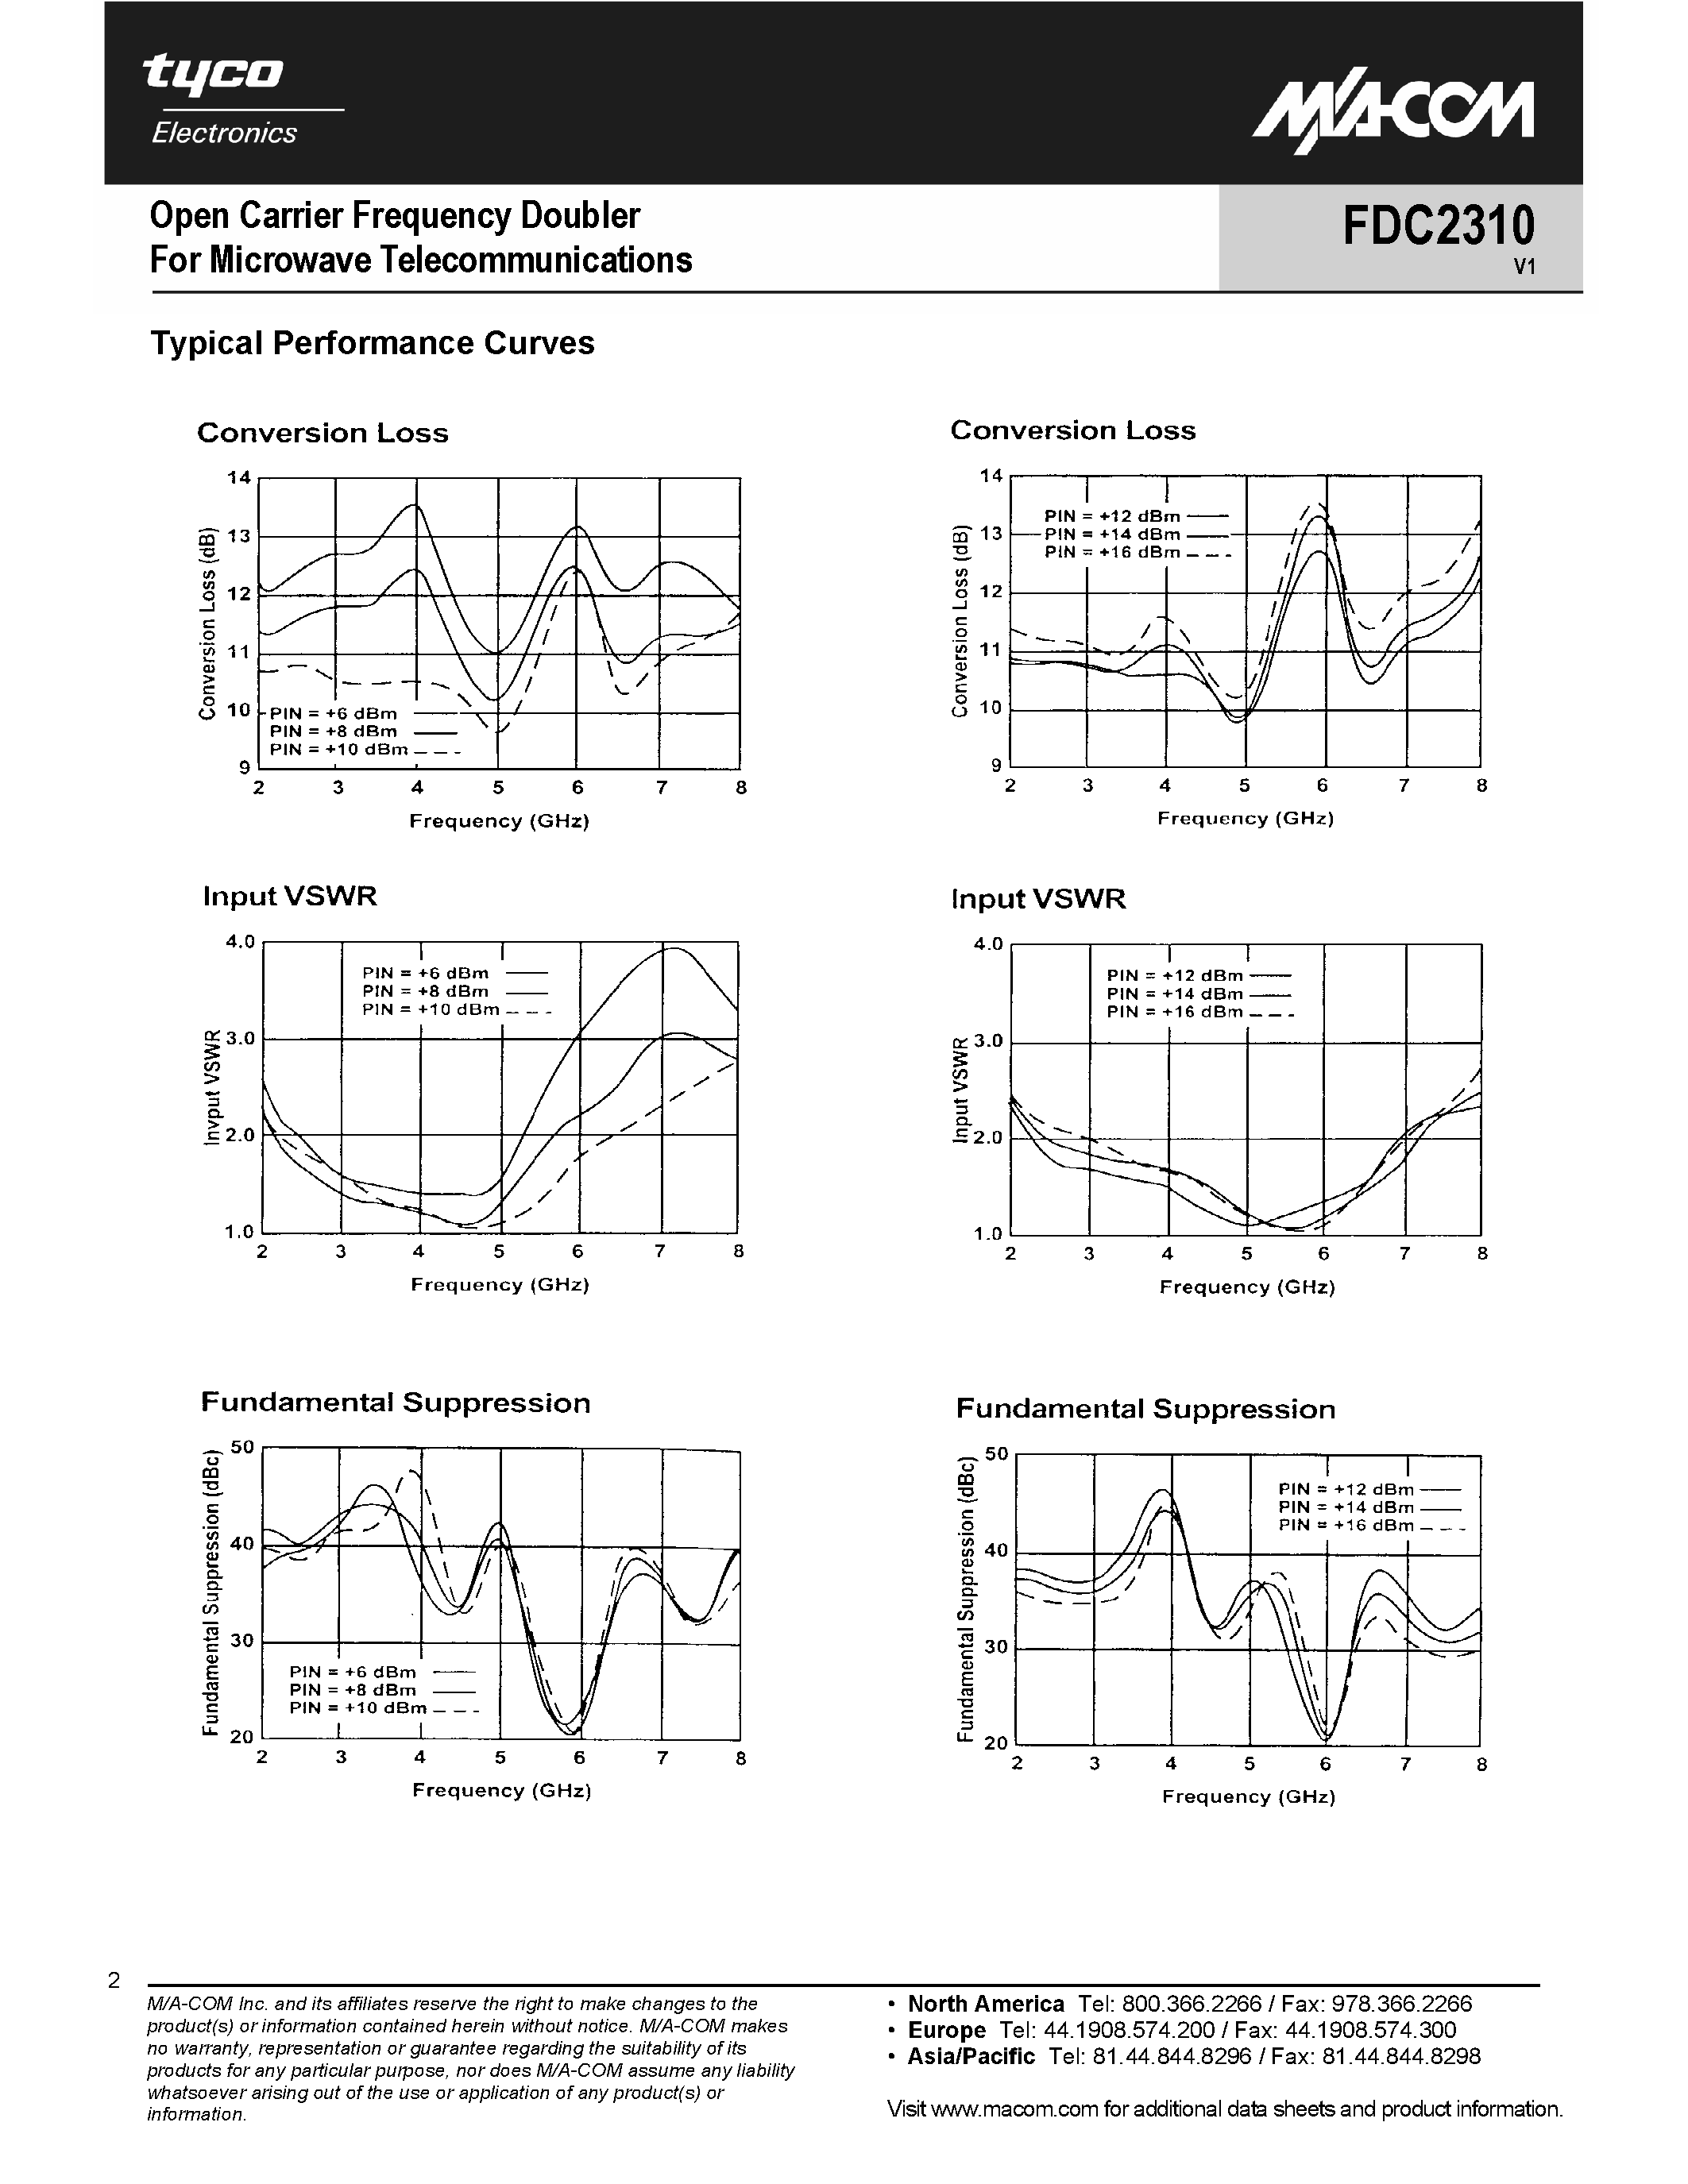 Datasheet FDC2310 - Open Carrier Frequency Doubler page 2